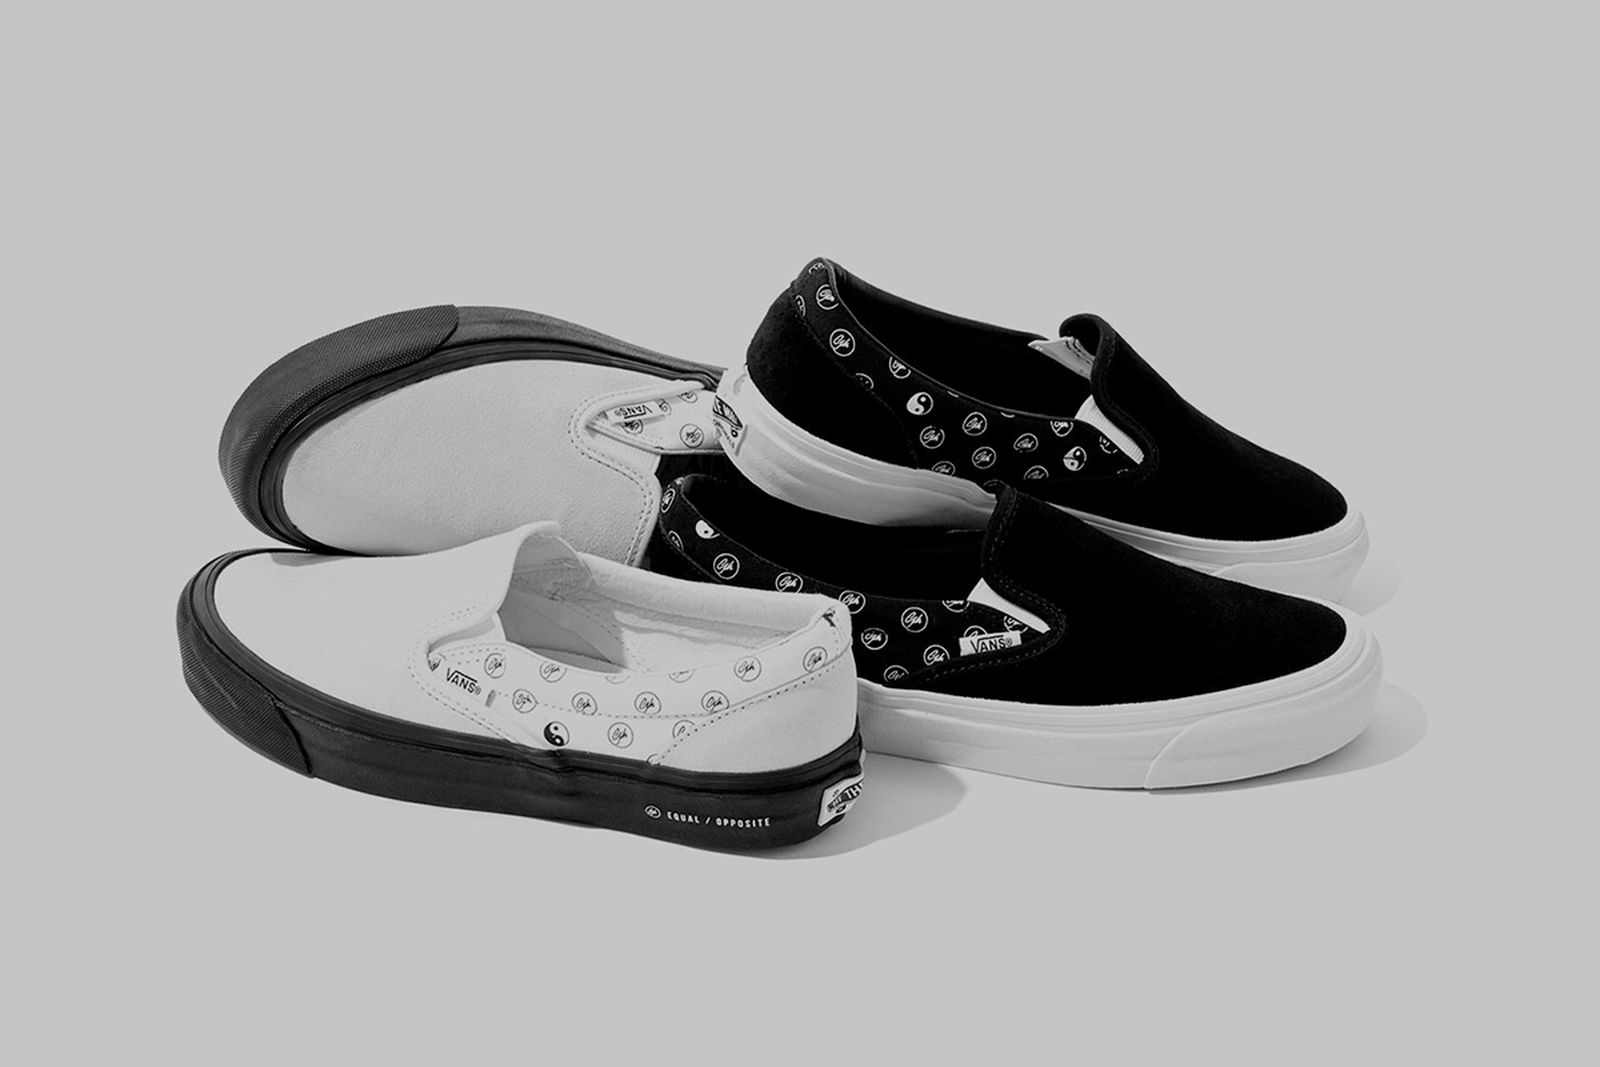 Goodhood Dropped Another Fire Vans